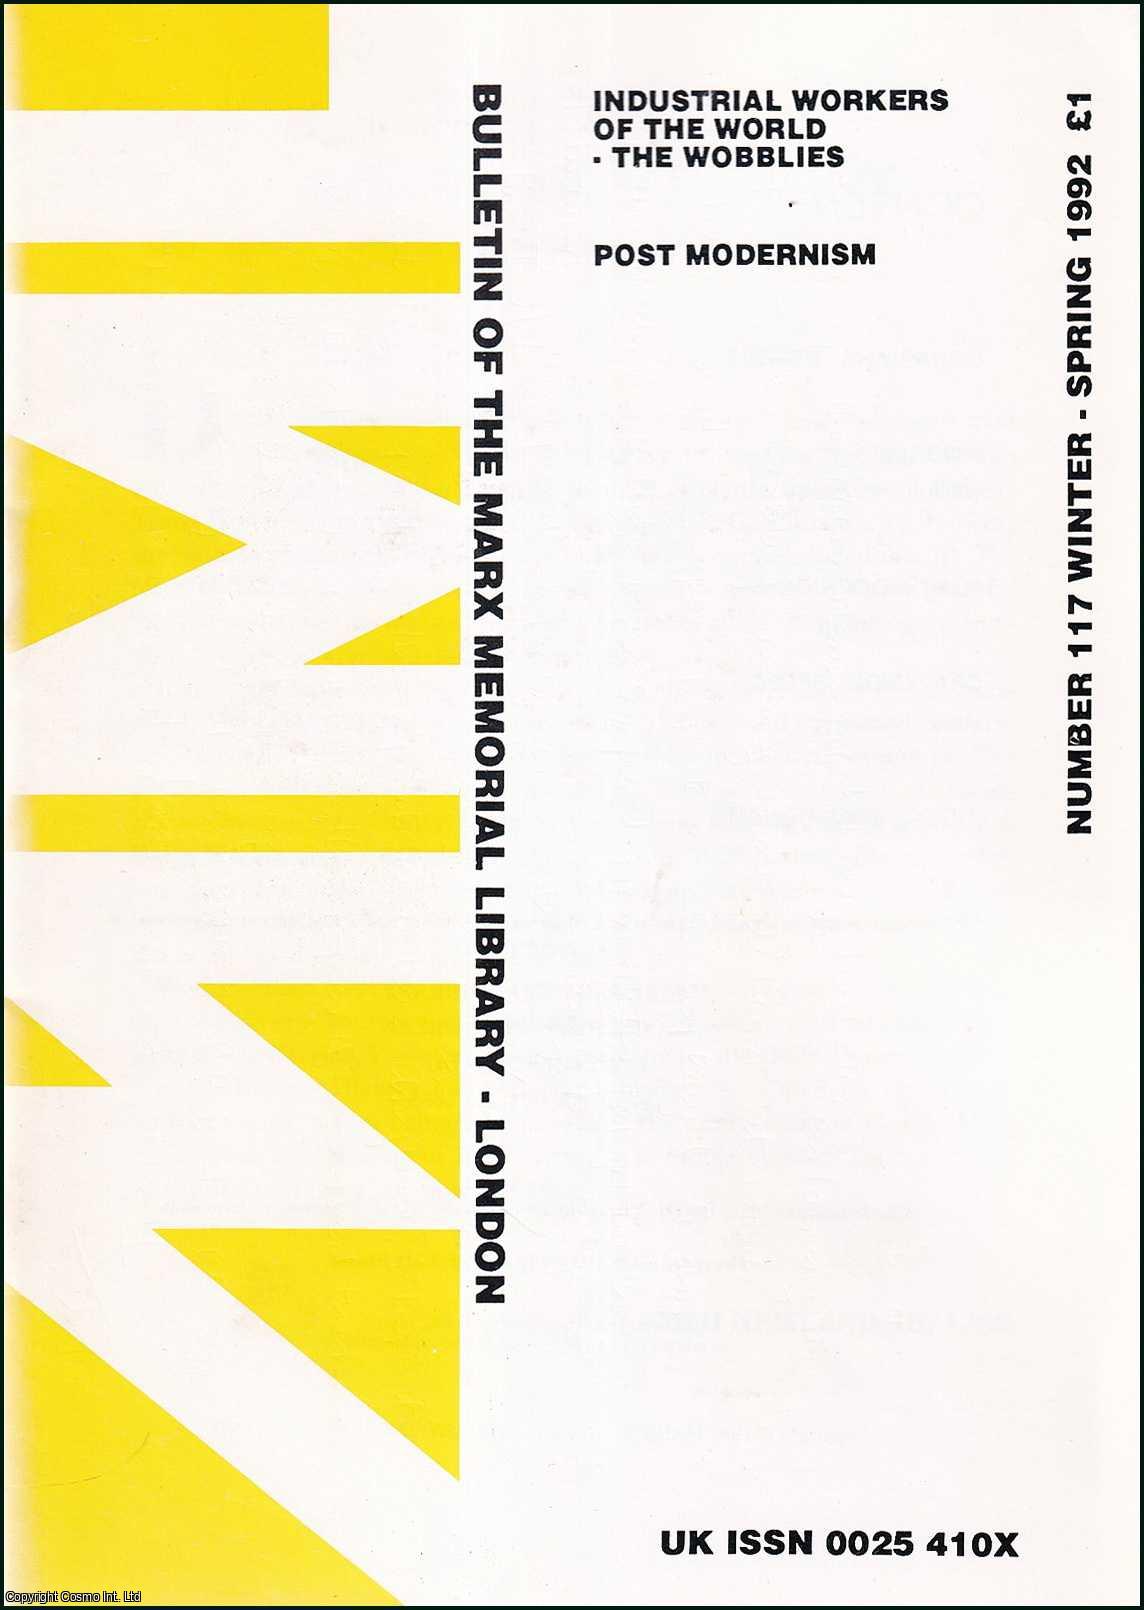 William Pomeroy et al - Industrial Workers of the World (The Wobblies), Post Modernism and other articles - Bulletin Number 117, Winter-Spring 1992, of the Marx Memorial Library.